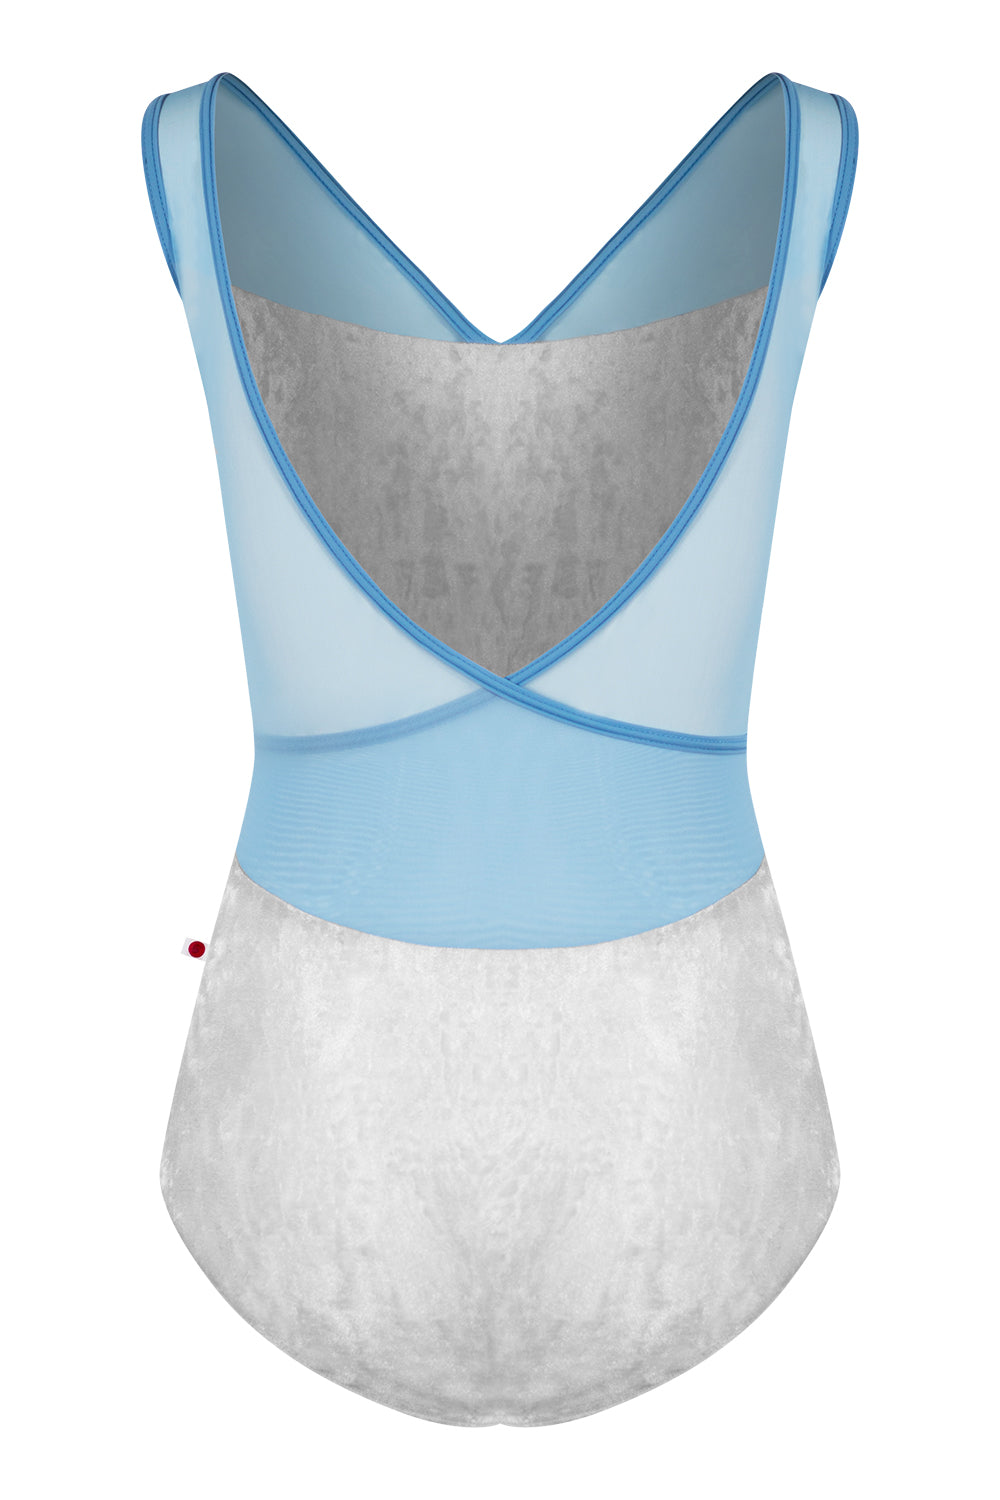 Masha leotard in CV-Silver body color with Mesh Glacier top color and T-Bluebell trim color